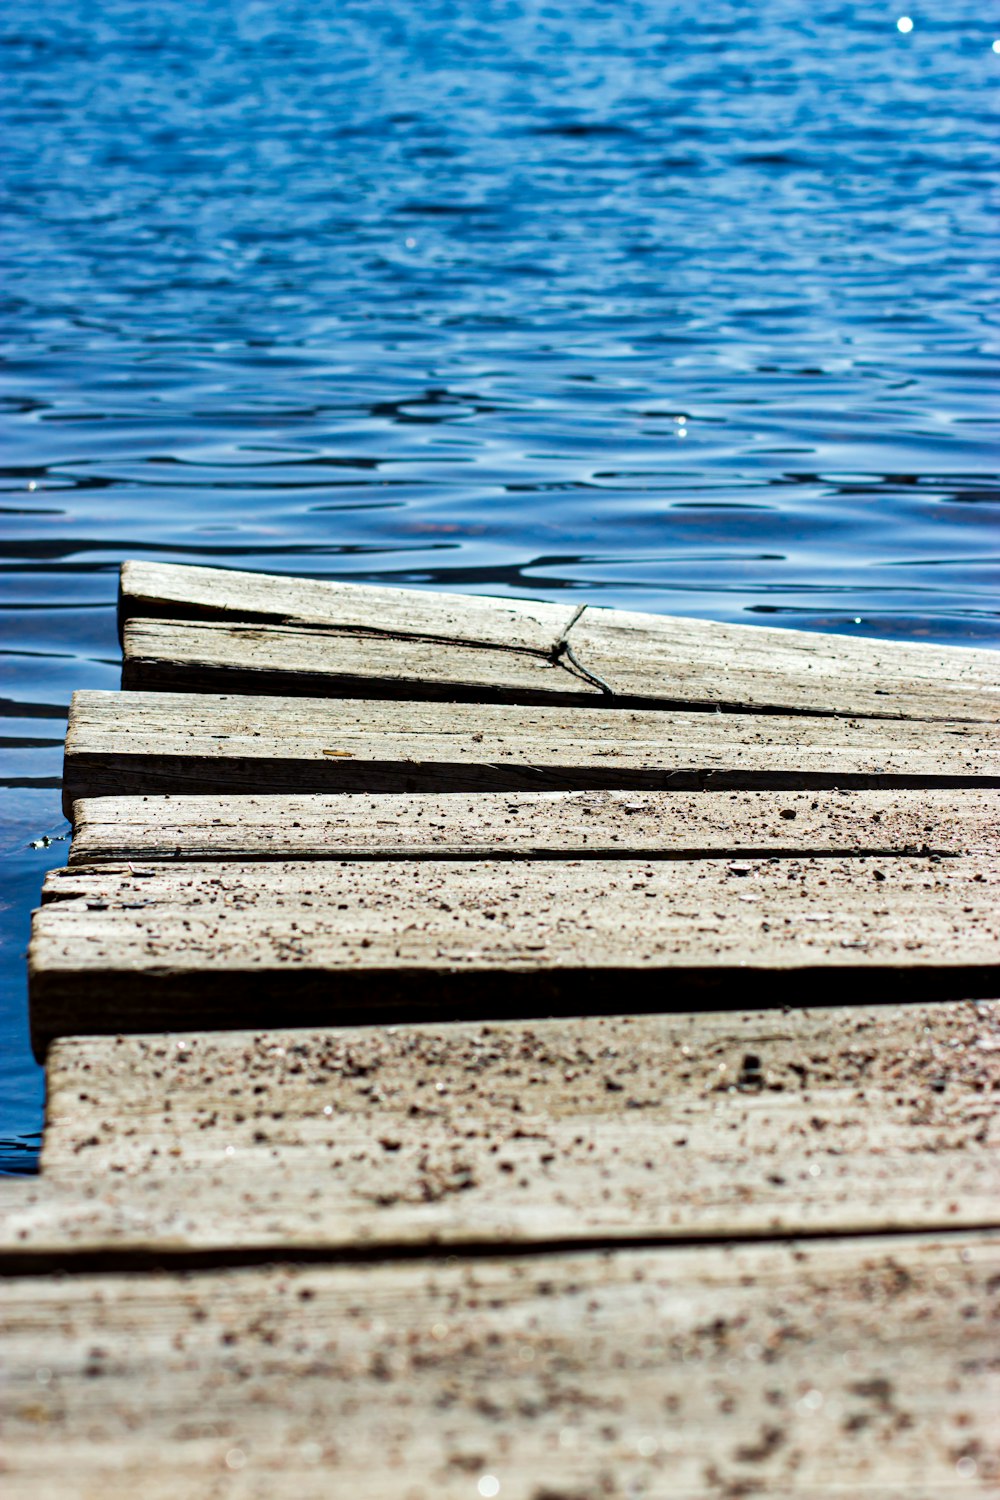 brown wooden dock on water during daytime